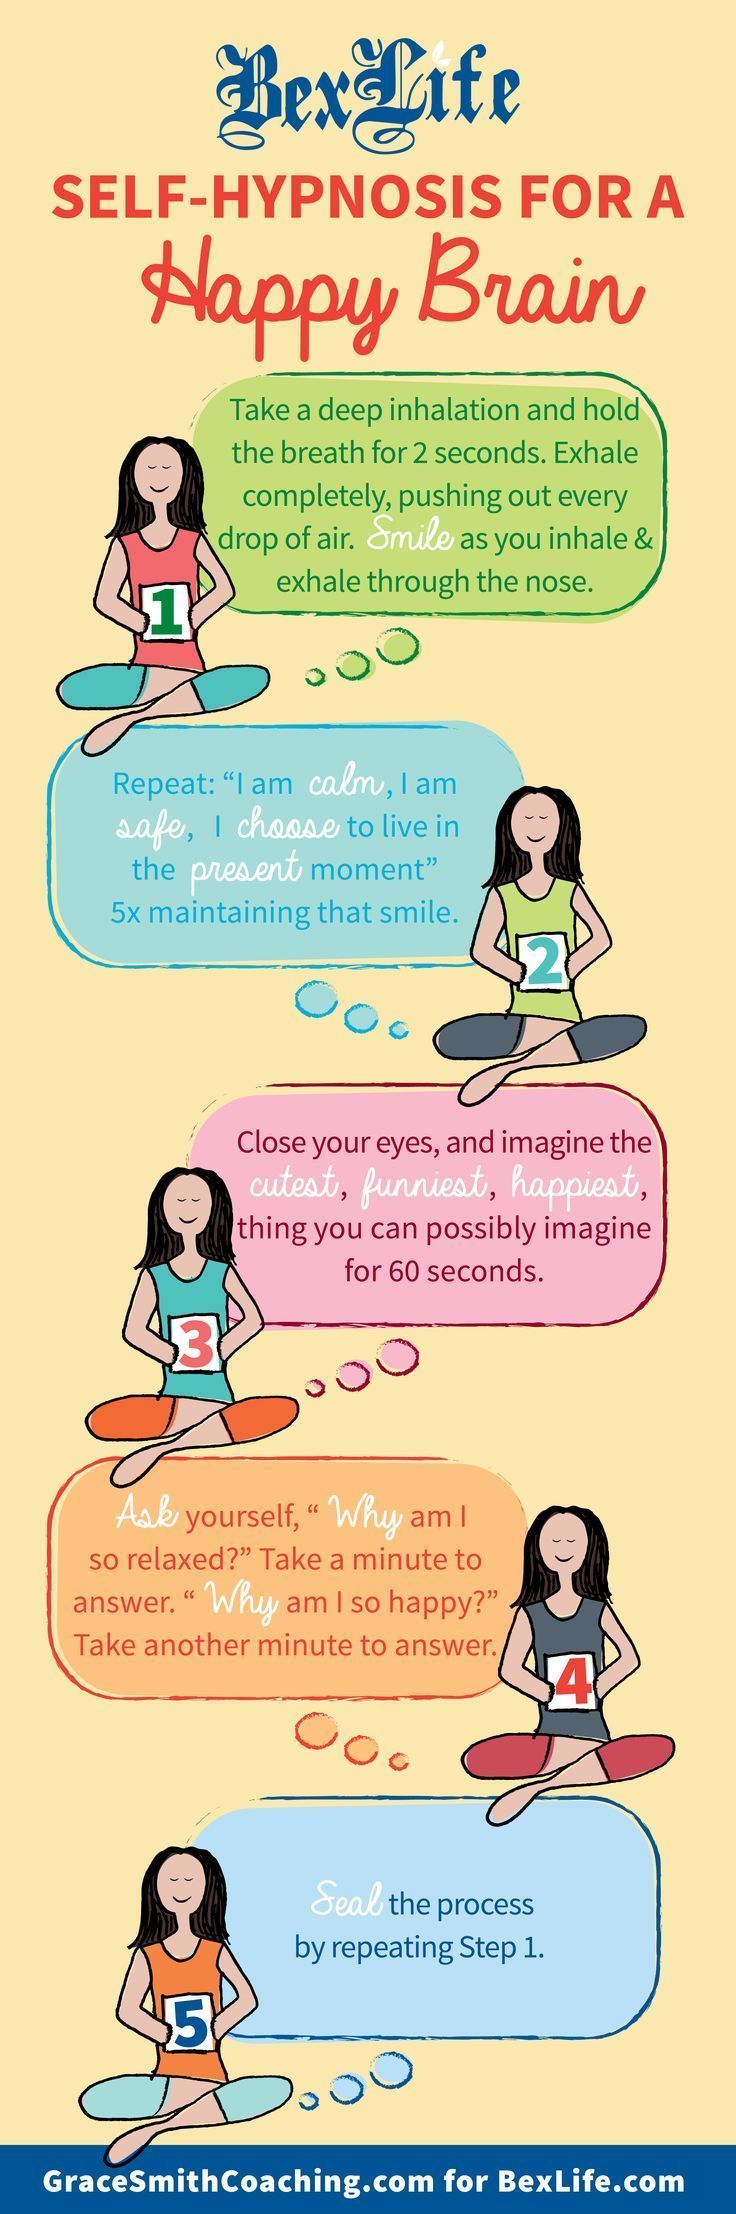 More of a nice guided centering rather than self-hypnosis, refreshingly simple! Simple mindful breathing exercise to reduce stress